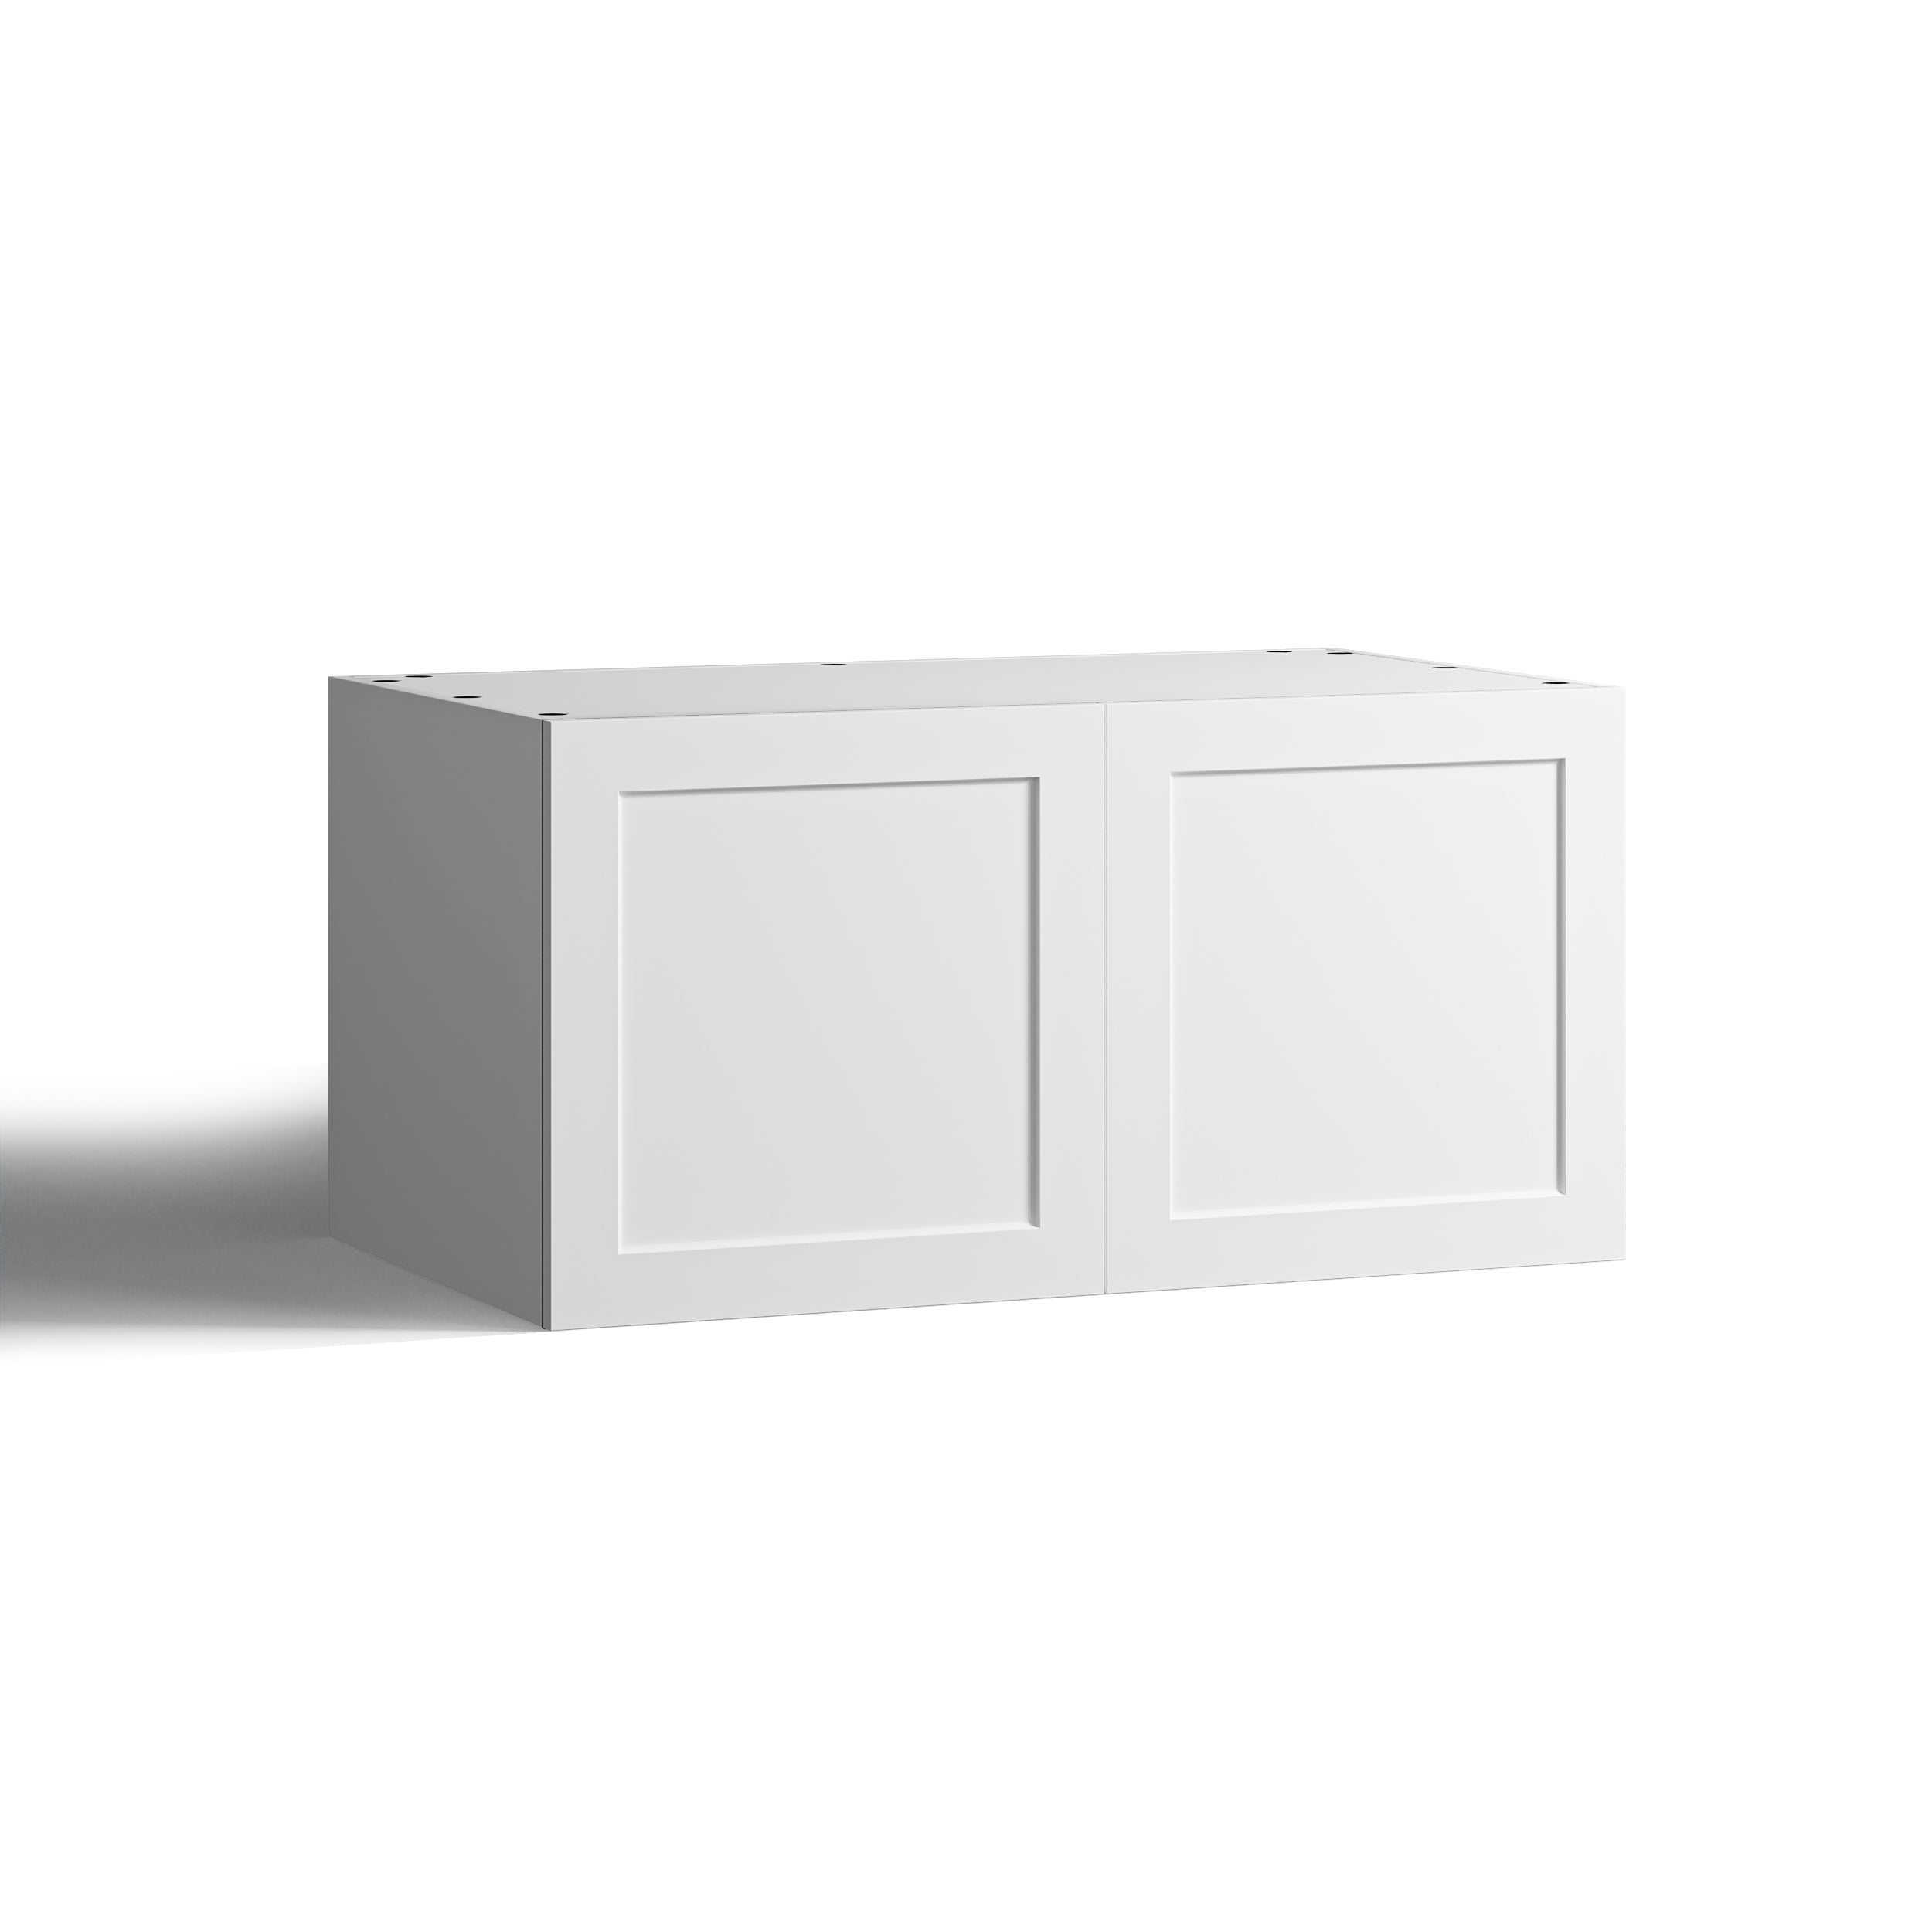 75x40 - Cabinet (58cm D) w 2 Doors - French Shaker - PAX